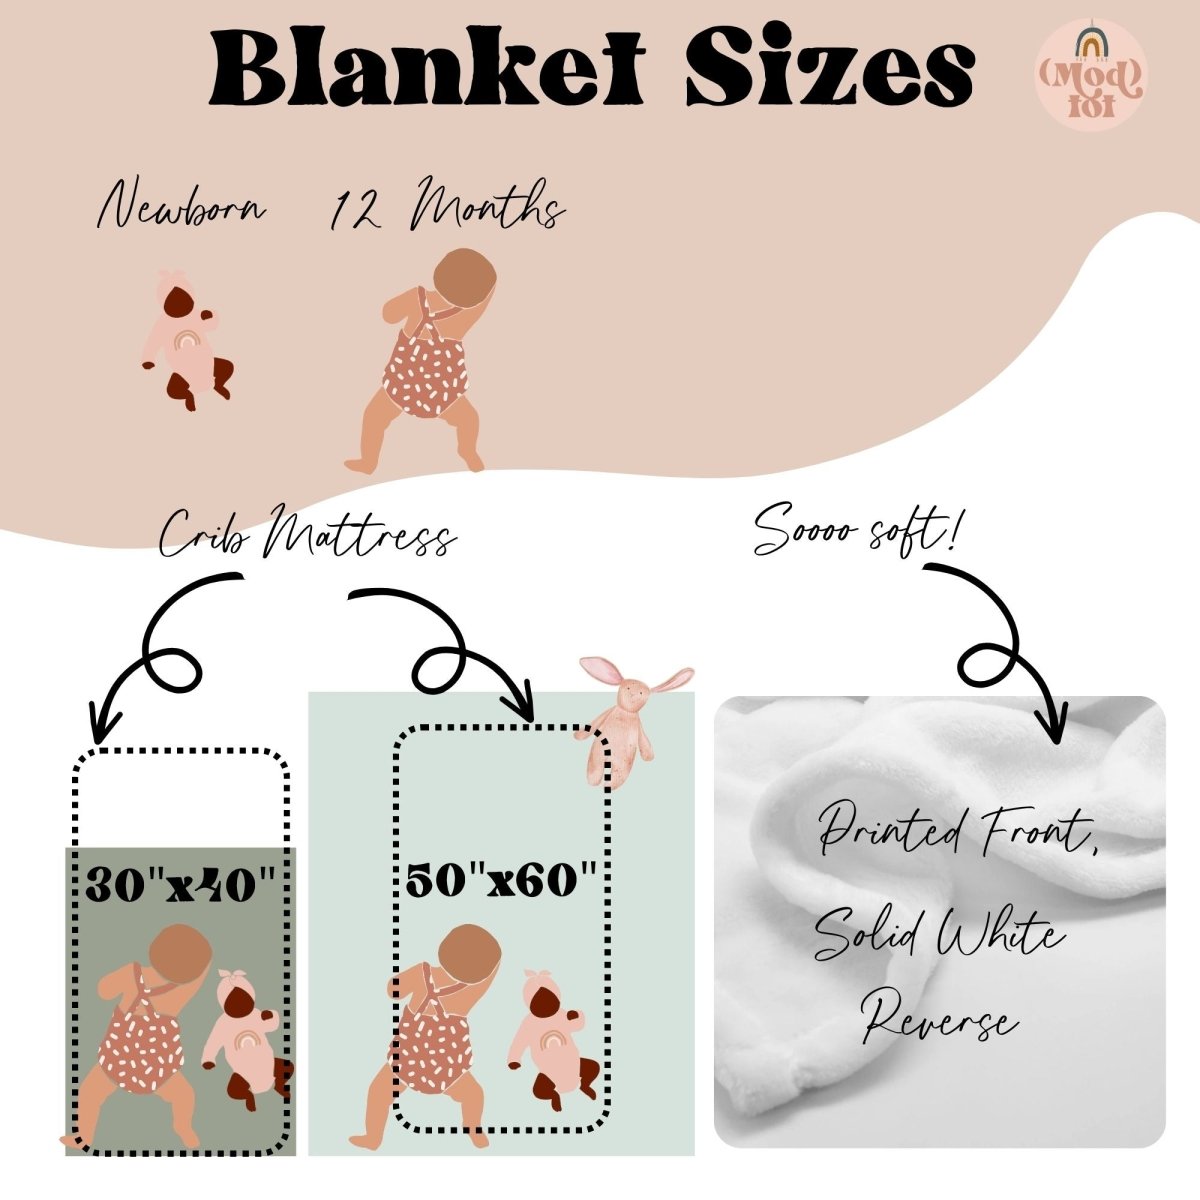 Woodland Floral Adventure Personalized Minky Blanket - gender_girl, Personalized_Yes, text